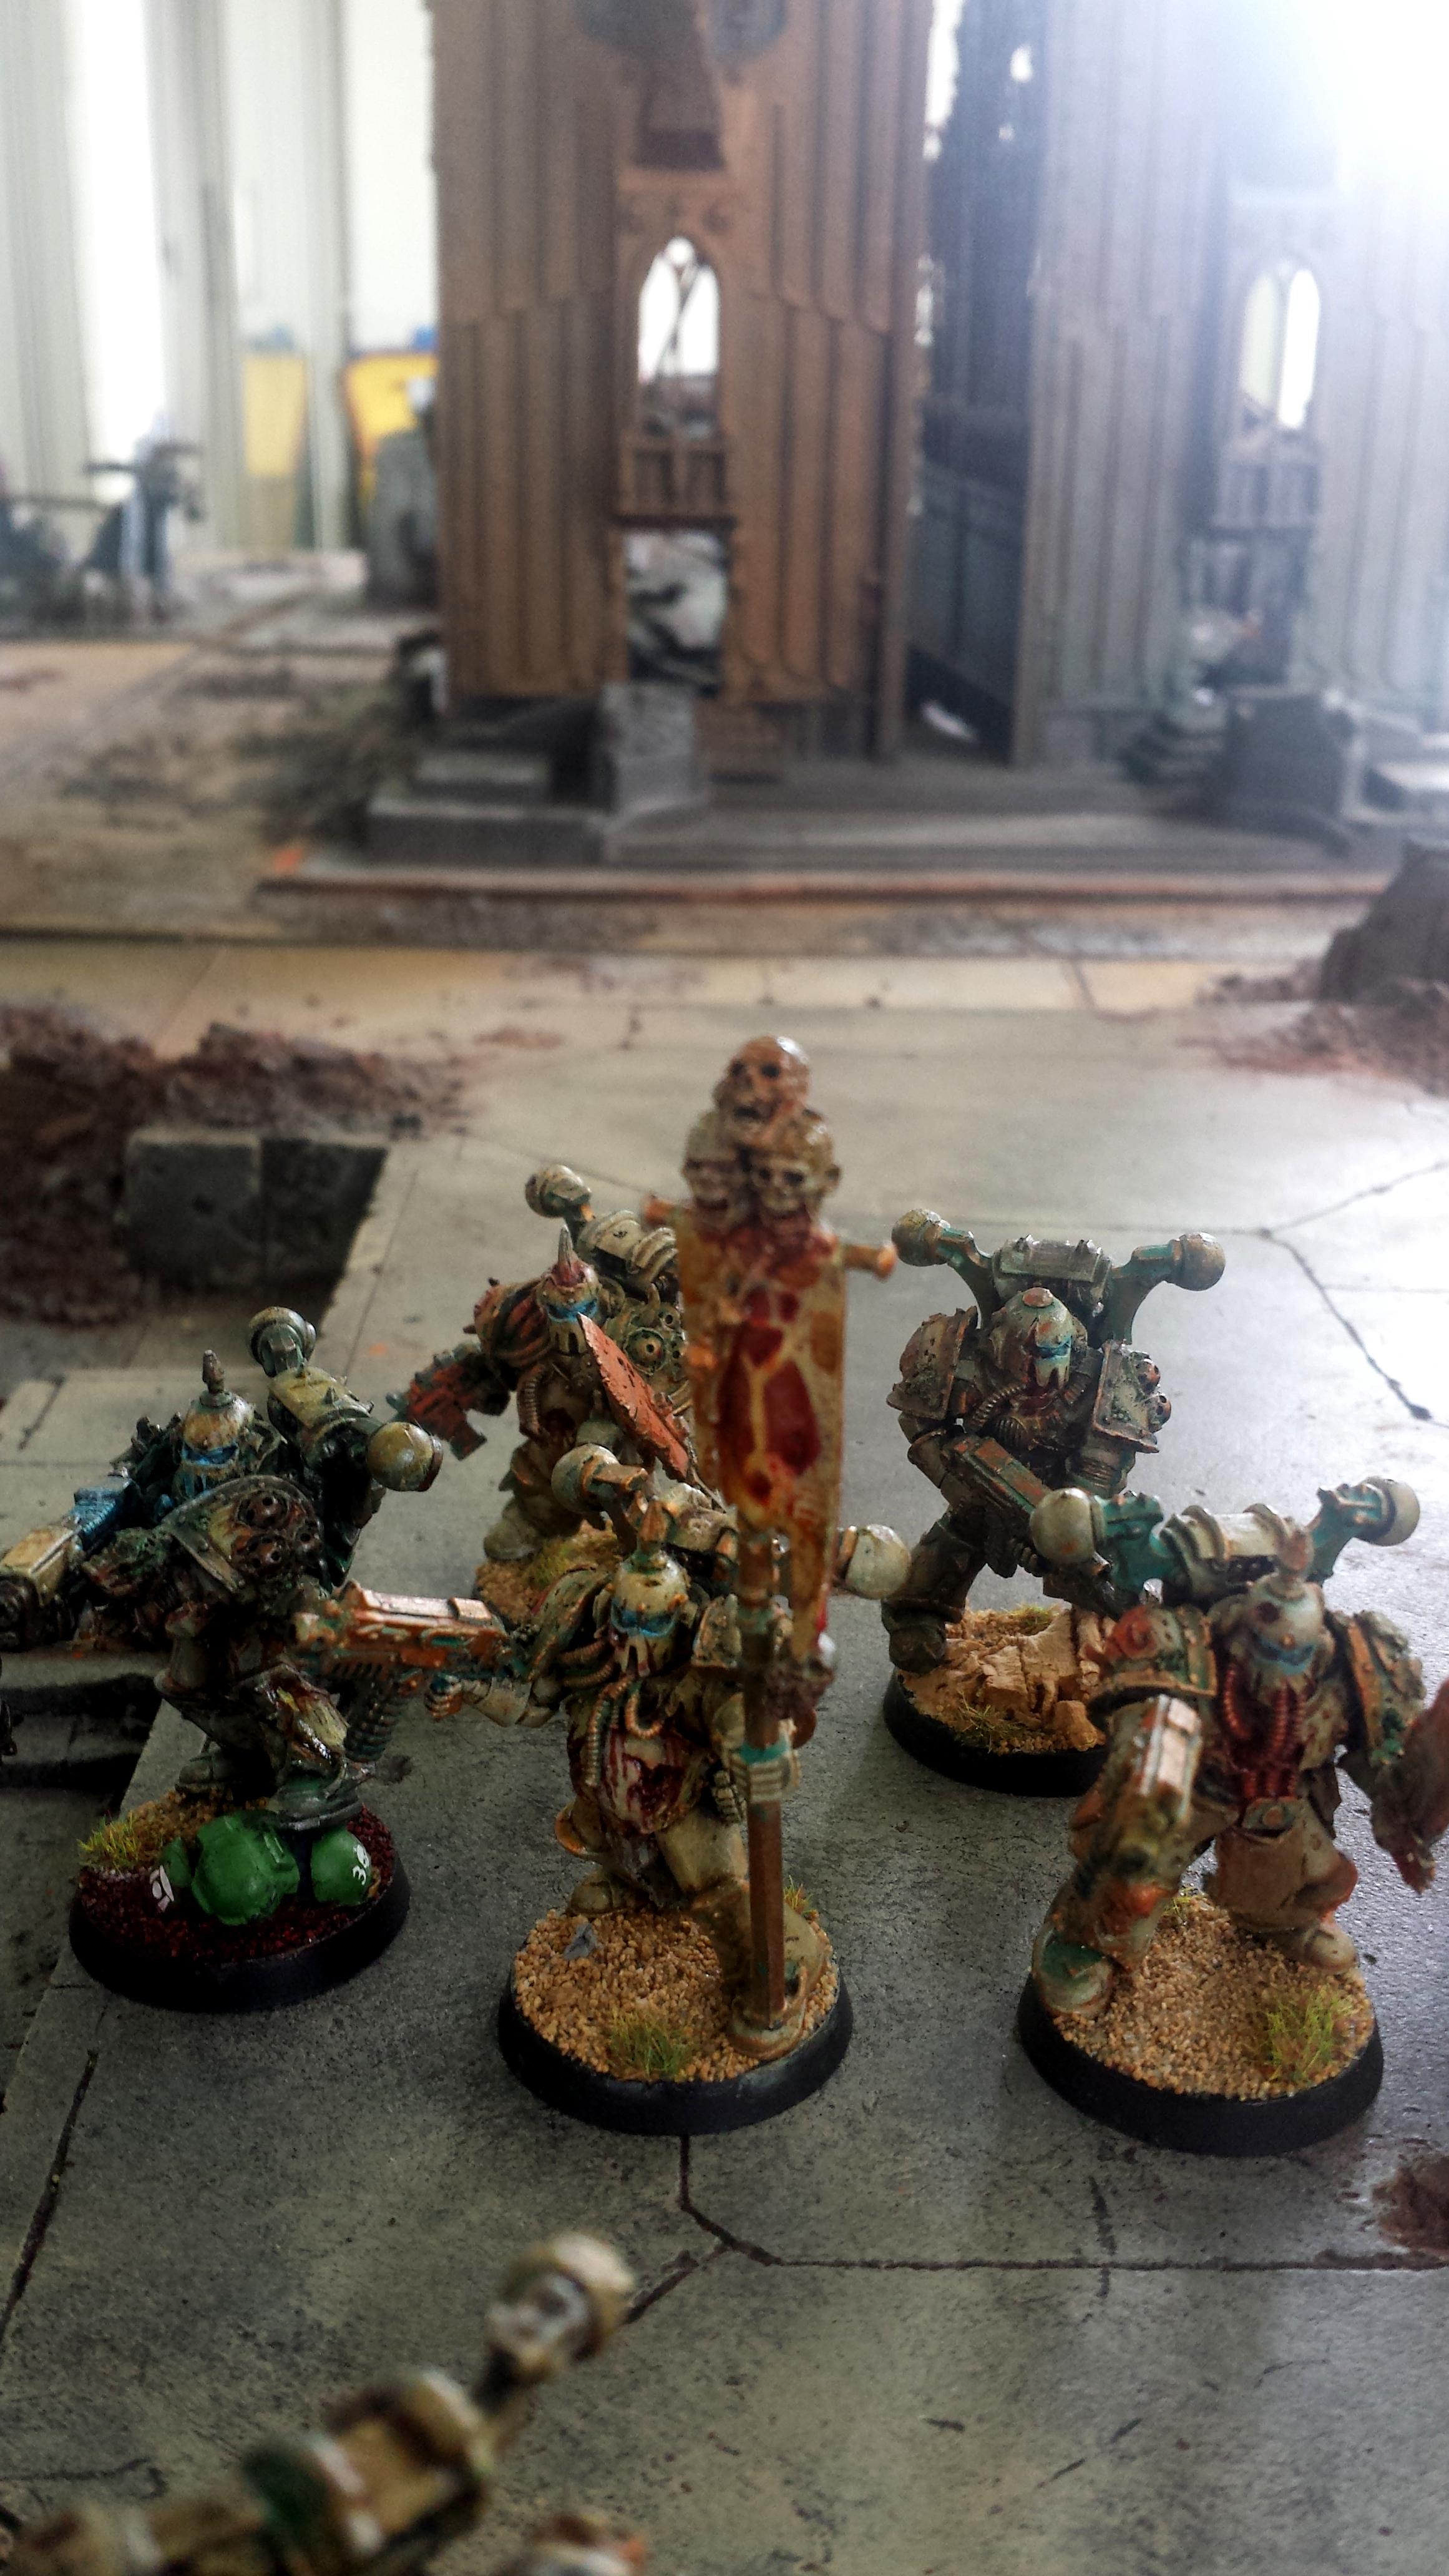 Apostles Of Contagion, Chaos, Forge World, Nurgle, Plague Marines, Warhammer 40,000